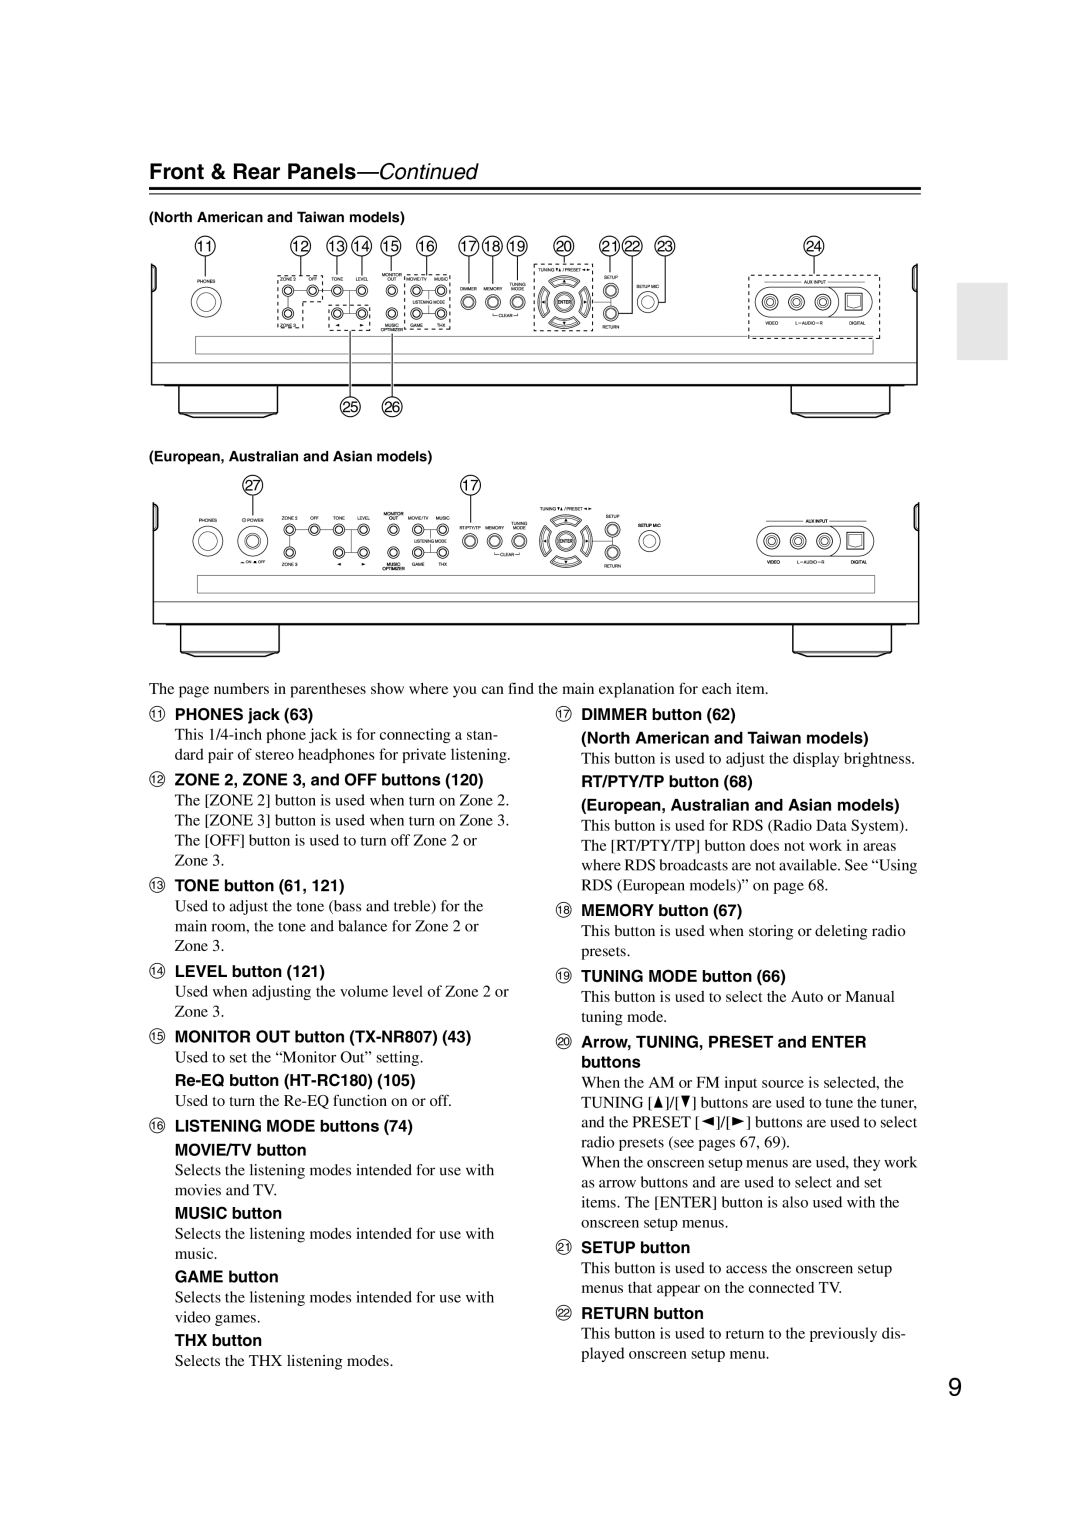 Onkyo 29400021, HT-RC180, TX-NR807 instruction manual Front & Rear Panels-Continued, l mn o p qrs t uv w 